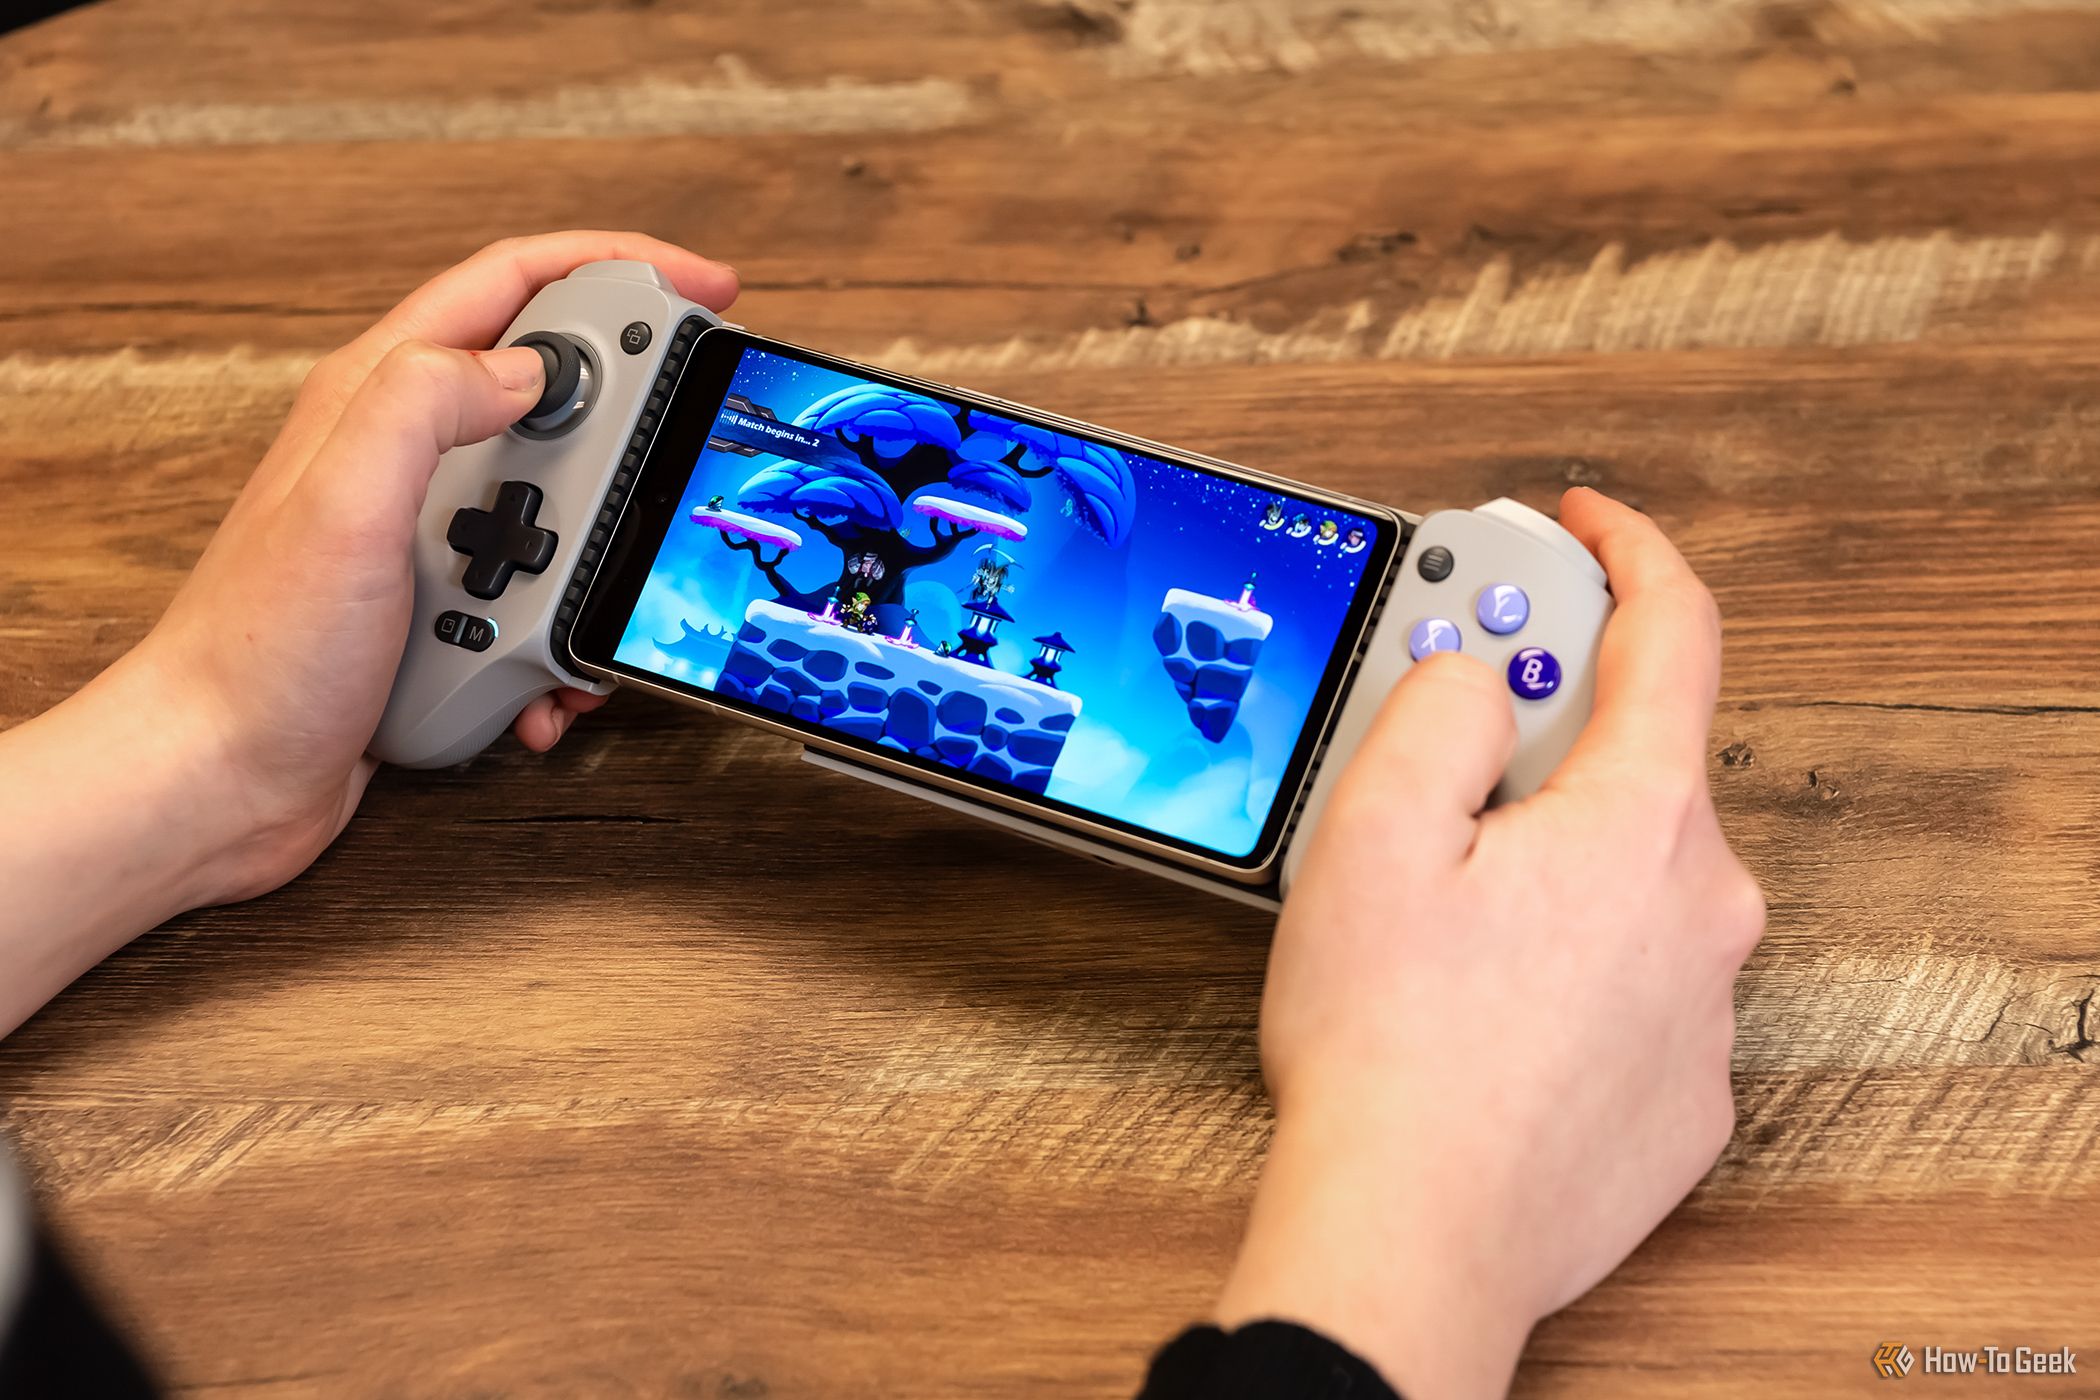 GameSir X2 Pro hands-on: The biggest problem with GameSir's